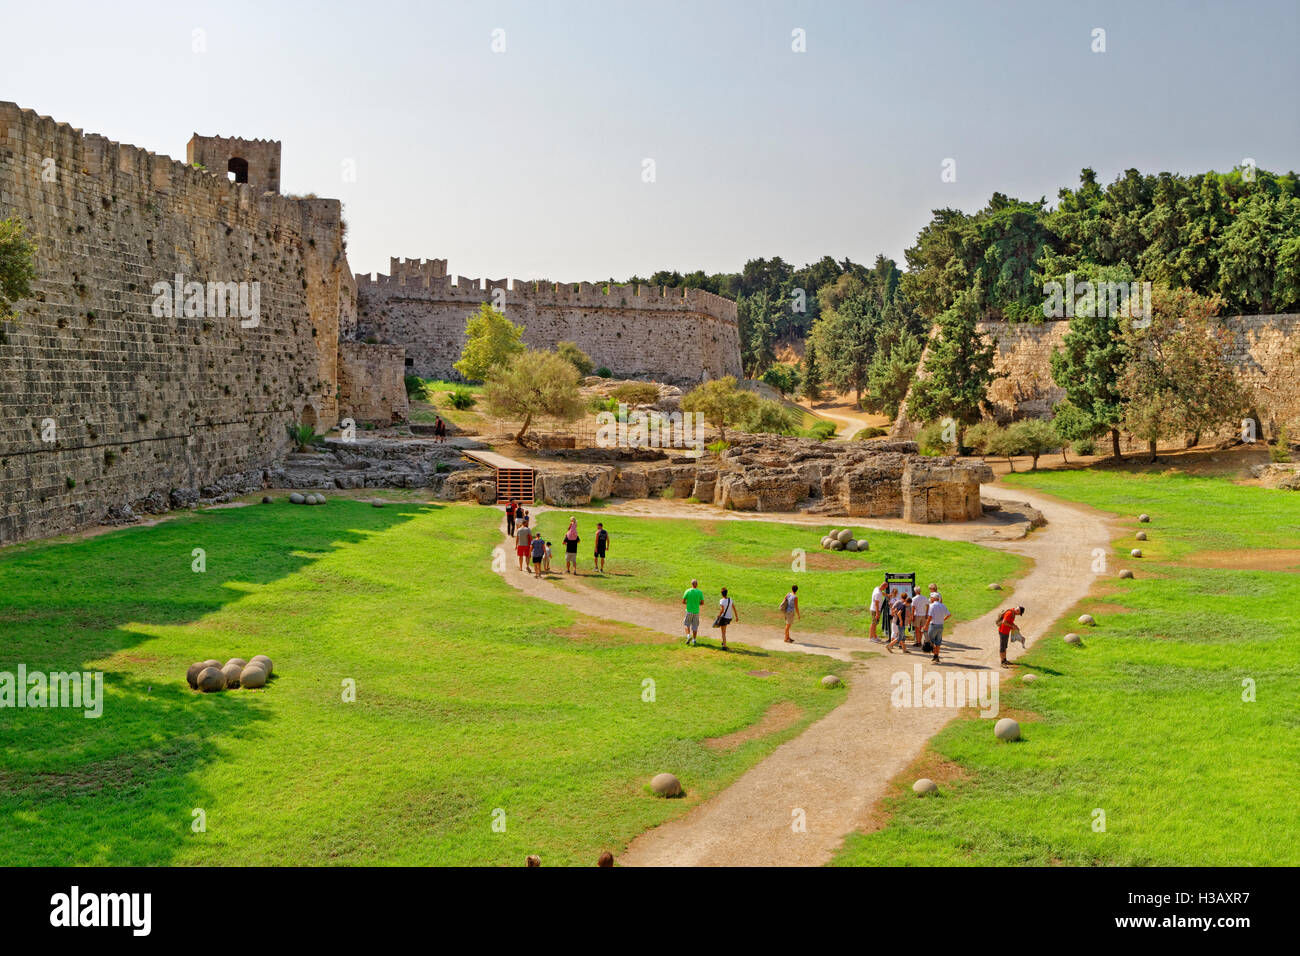 Outer dry moat area of the walled city of Rhodes, Rhodes Island, Dodecanese Island group, Greece. Stock Photo